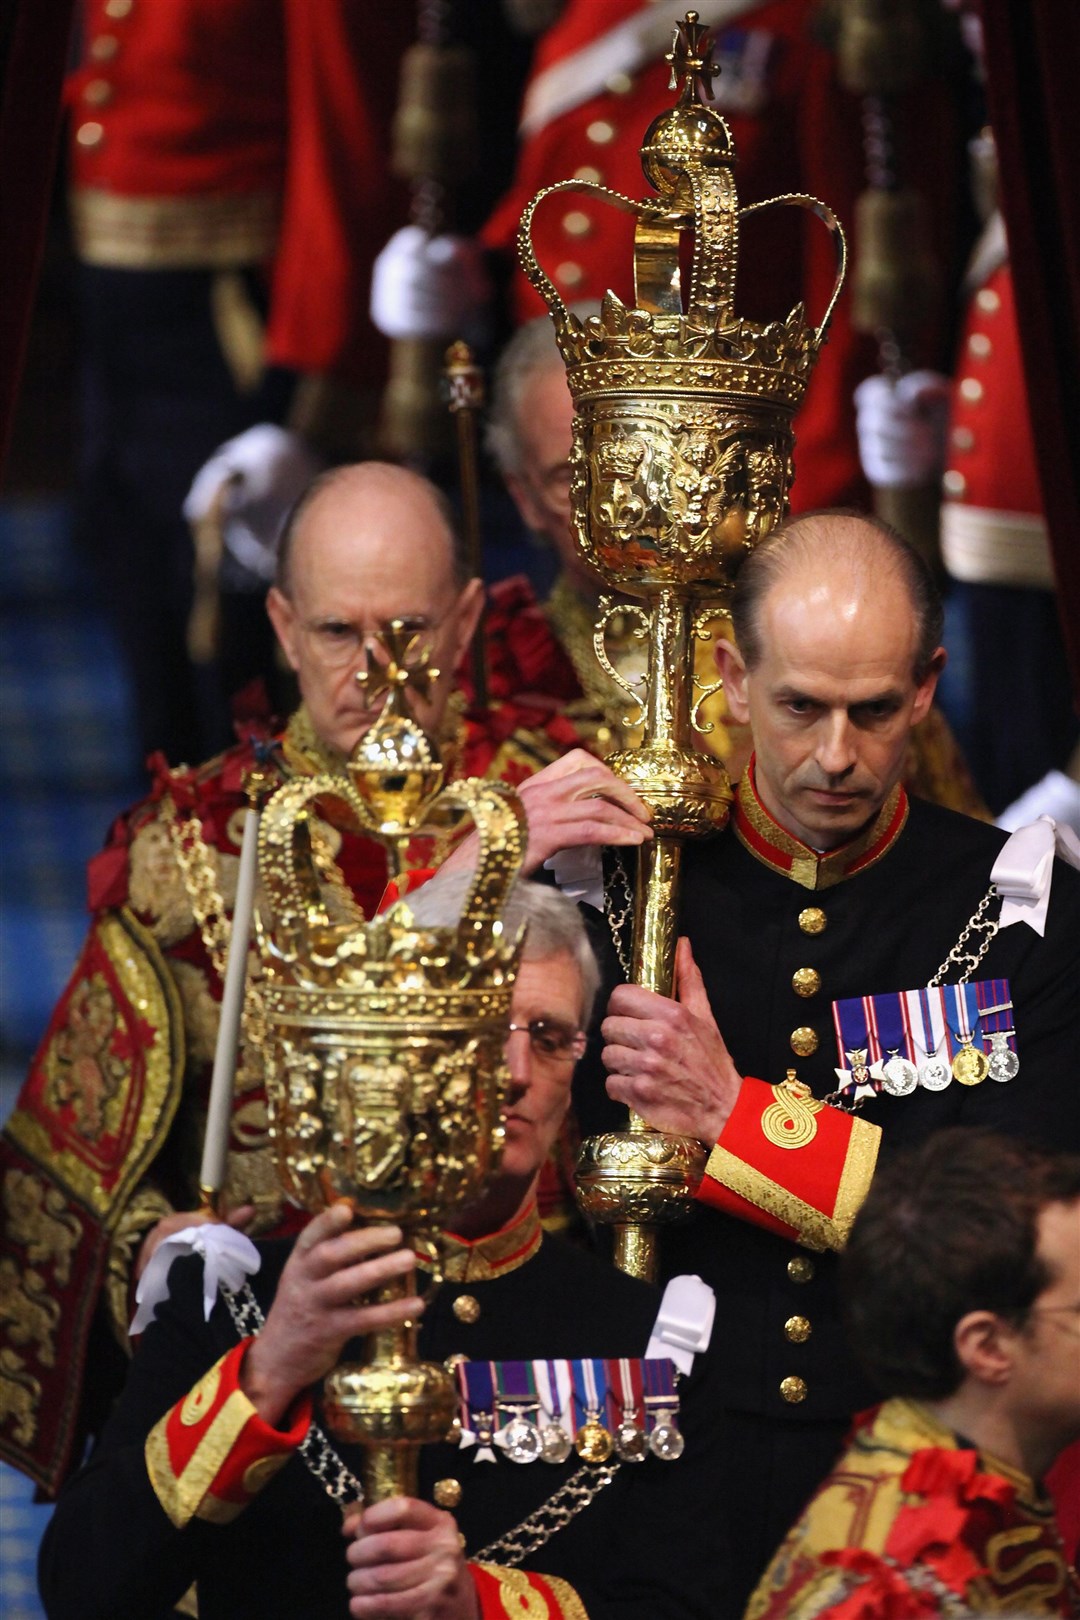 Guardsmen carry ceremonial maces into the House of Lords at the State Opening of Parliament in 2012 (Oli Scarff/PA)